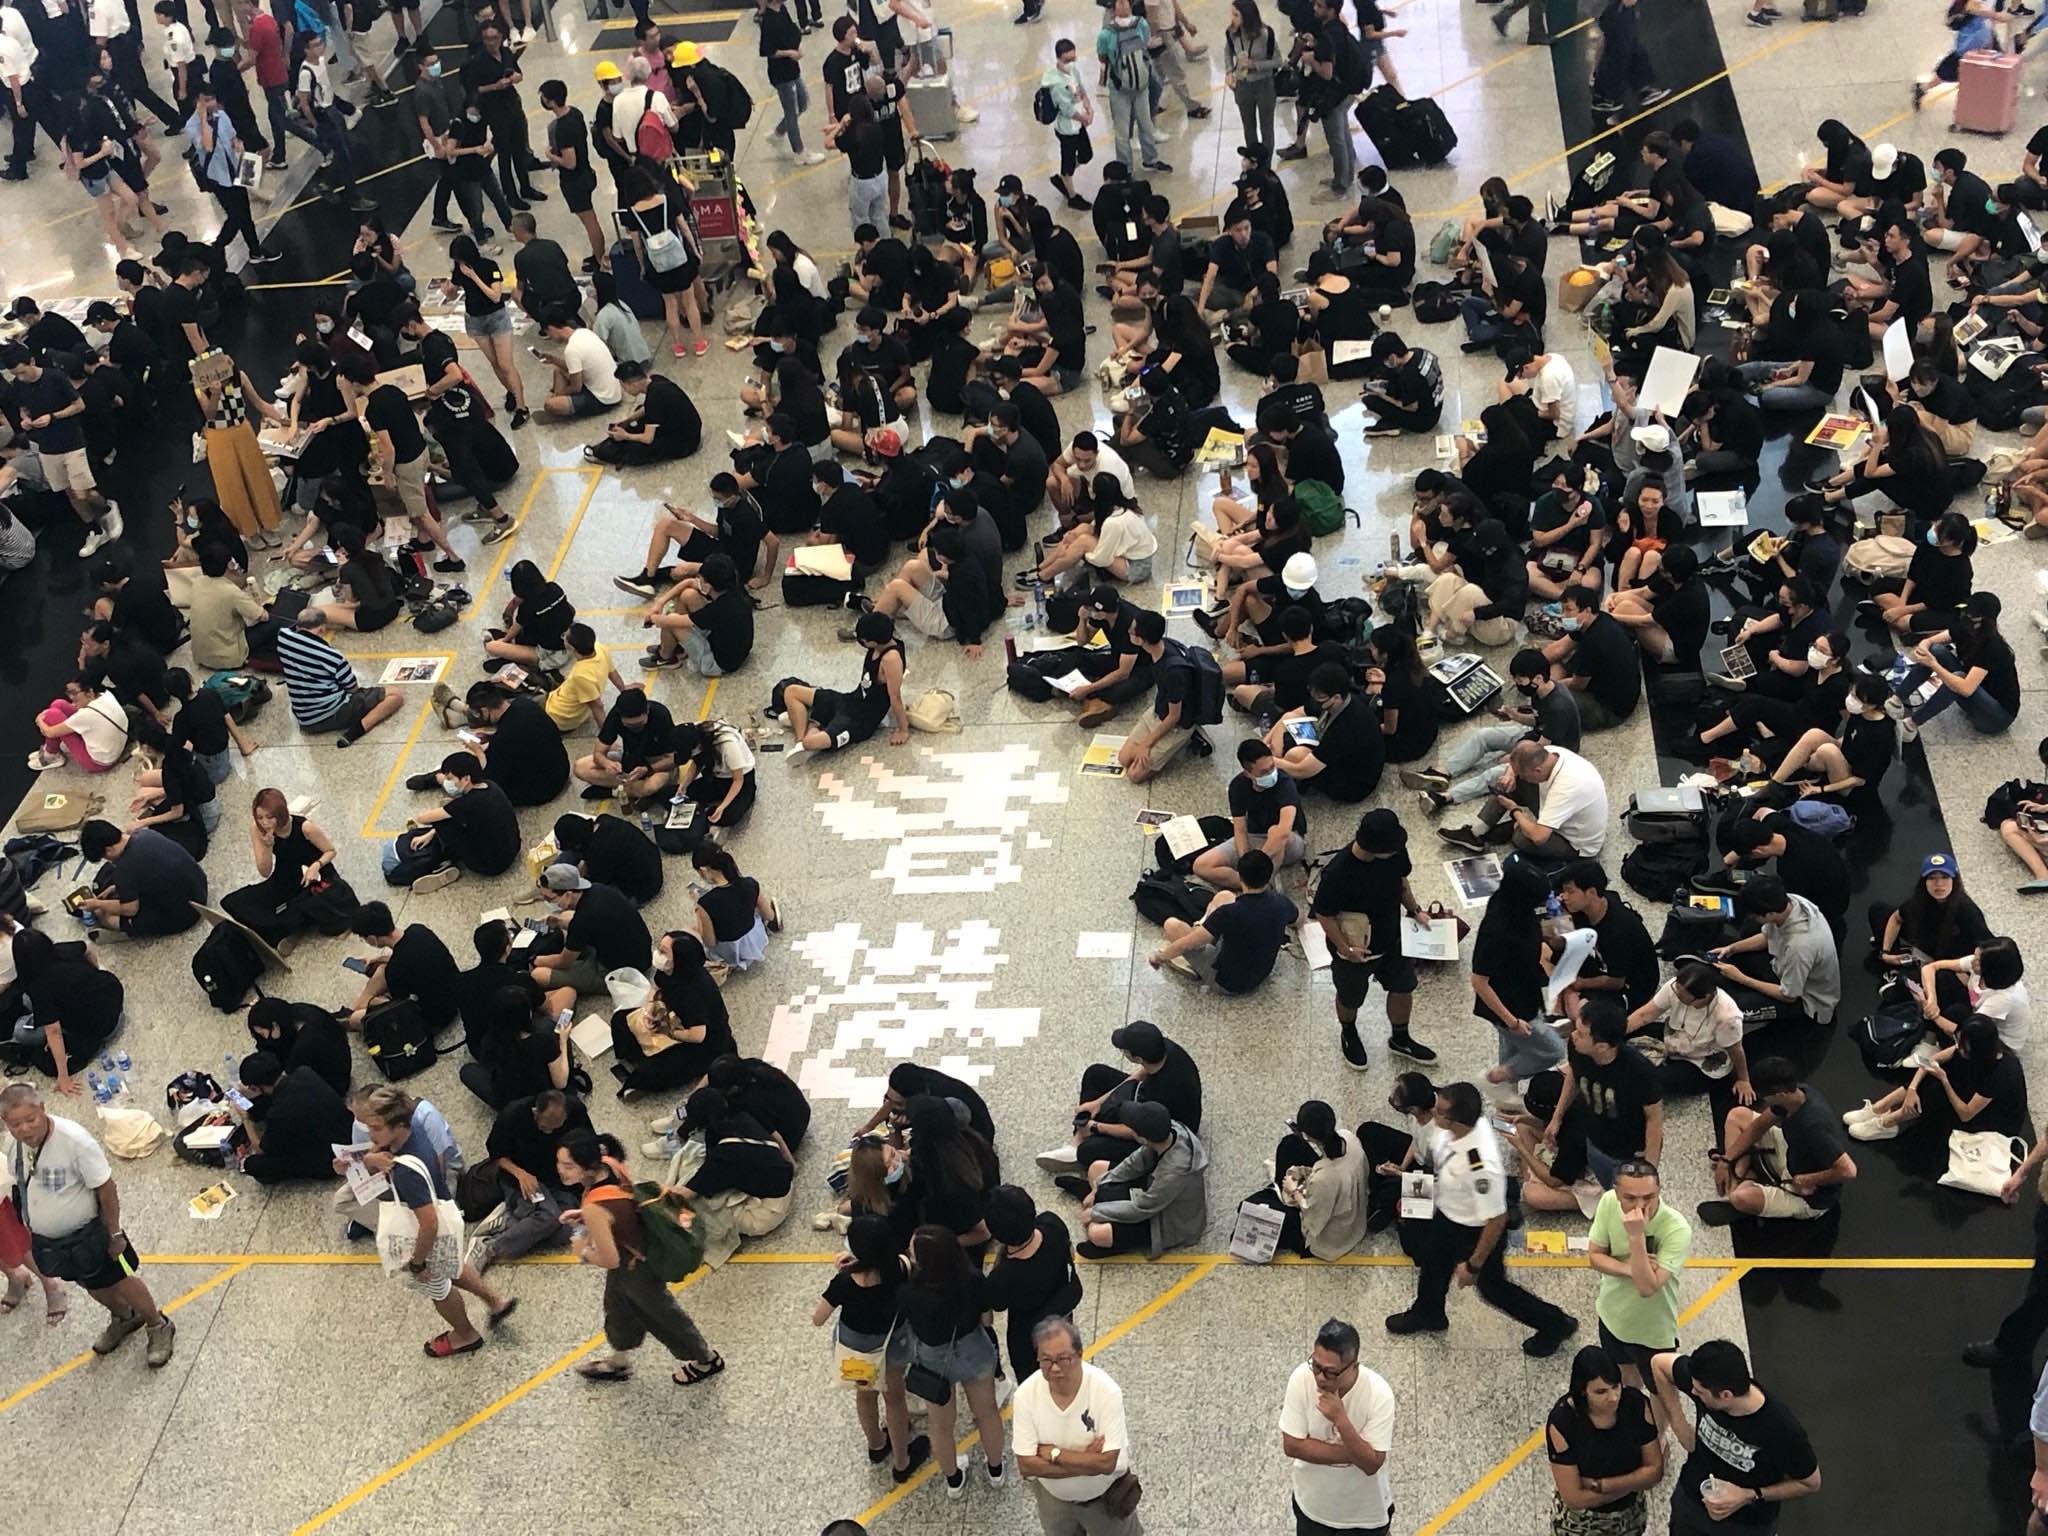 Protesters sit on the floor of Hong Kong International Airport today, surrounding a display with the characters for “Hong Kong” fashioned out of Post-It notes. Photo by Iris To.